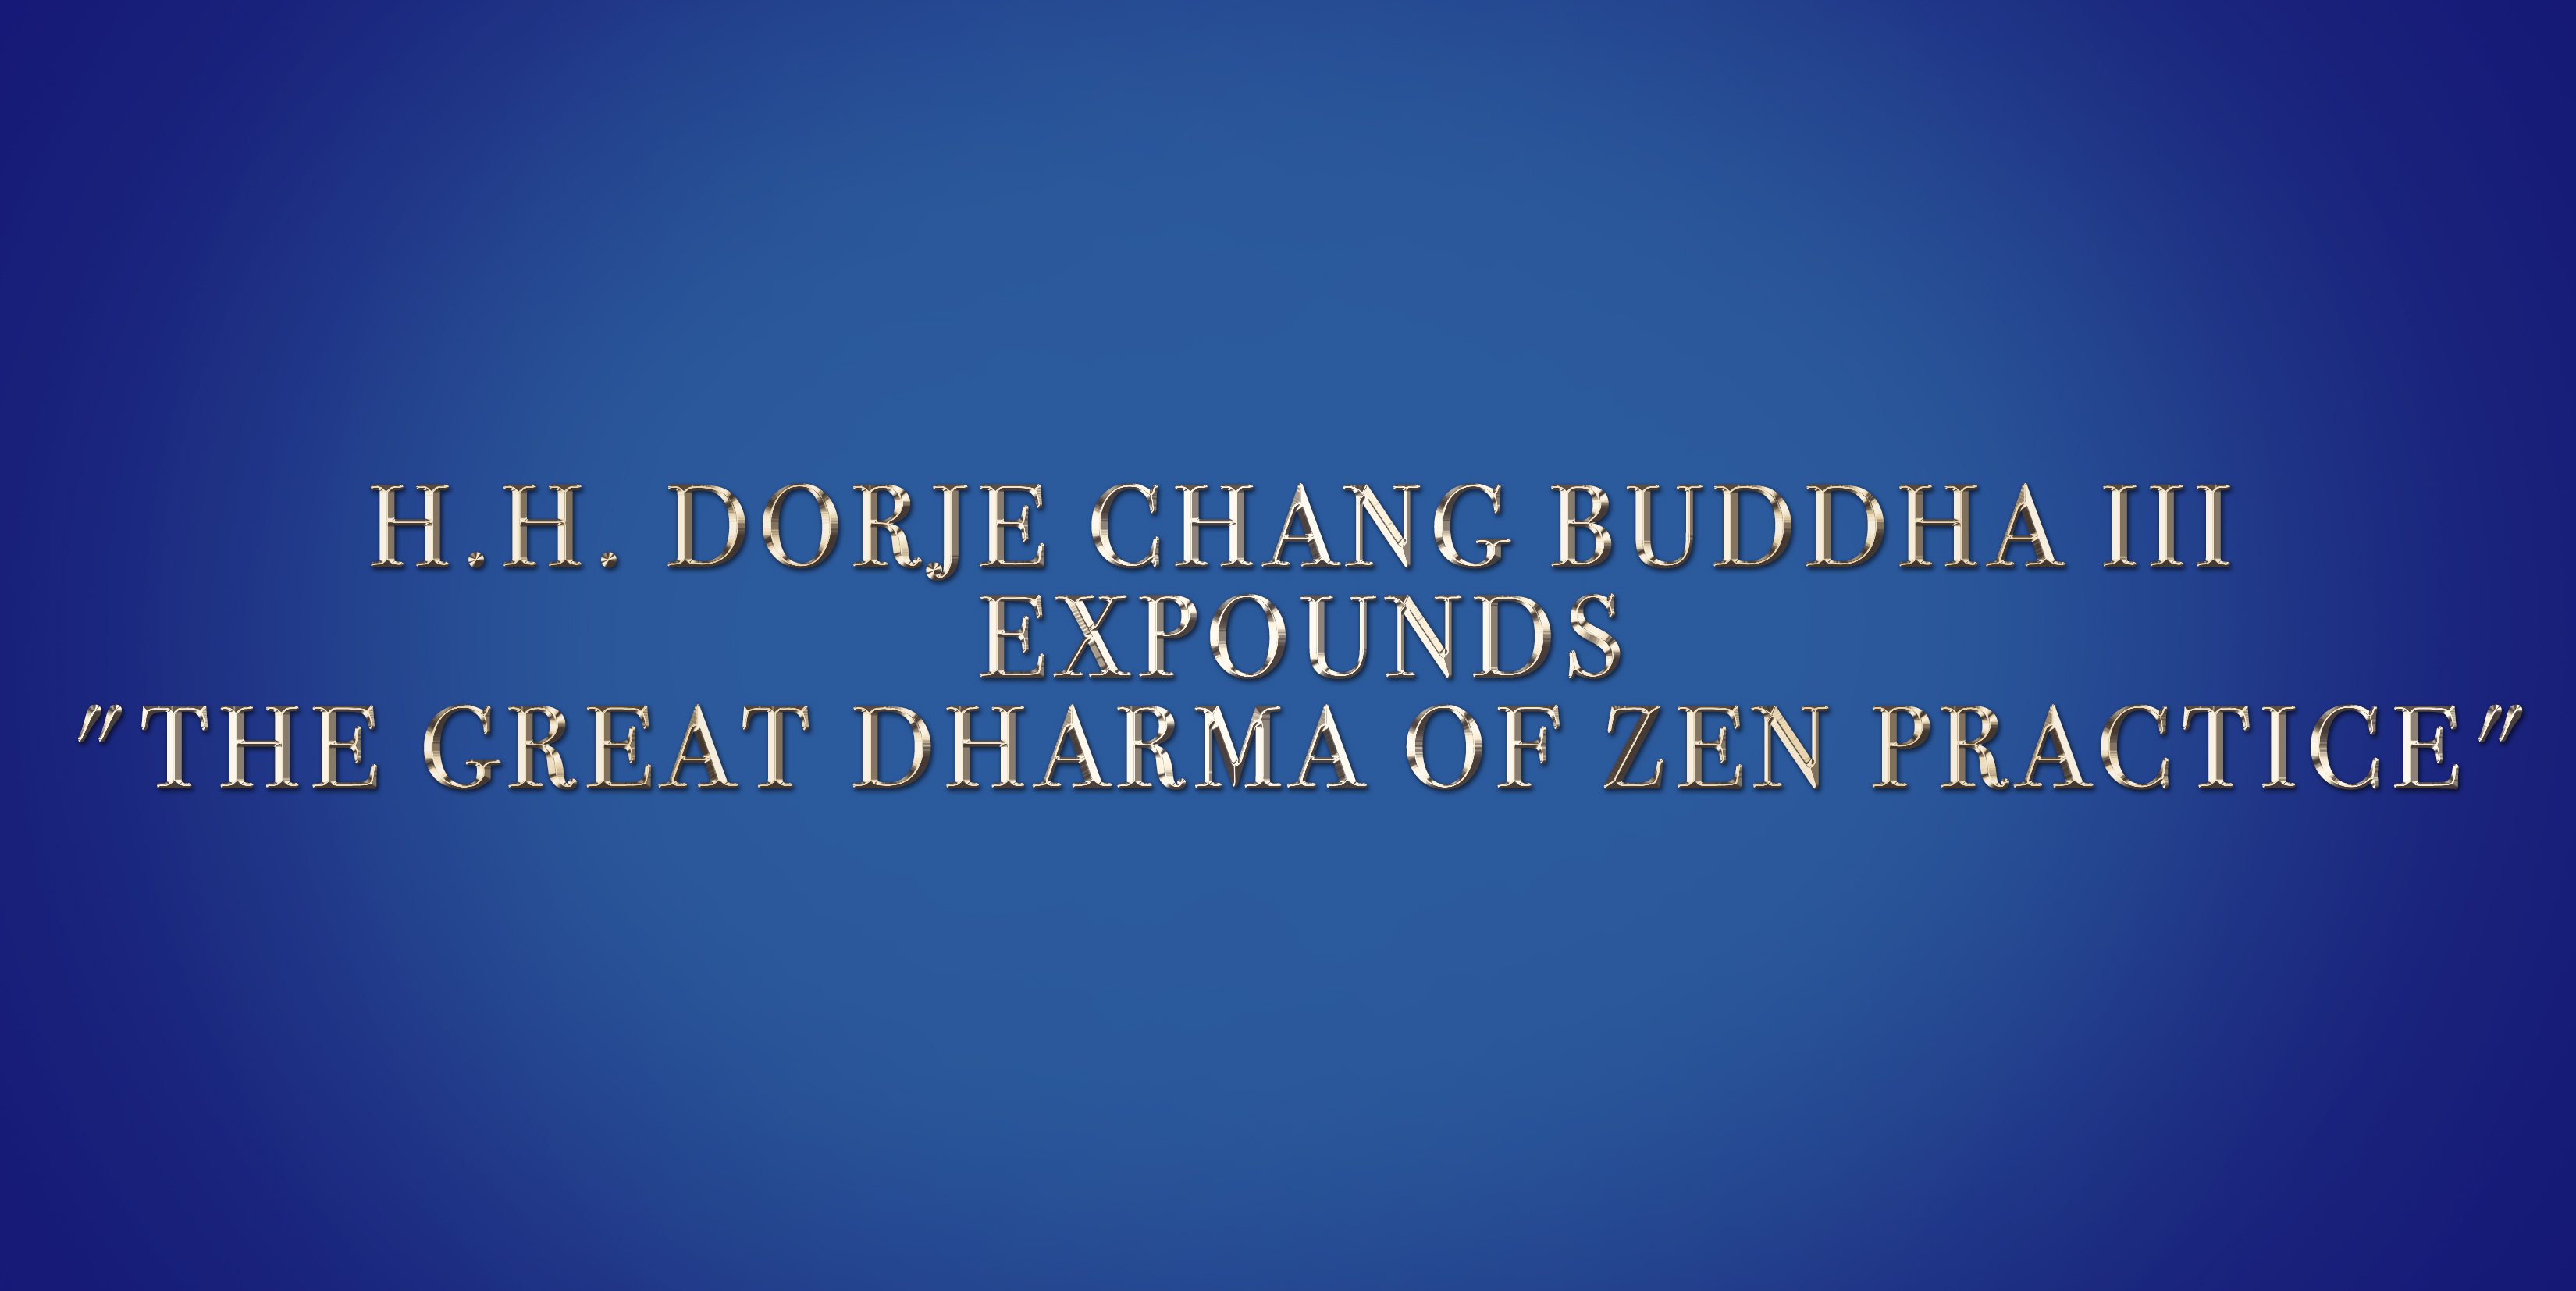 H.H. DORJE CHANG BUDDHA III EXPOUNDS “THE GREAT DHARMA OF ZEN PRACTICE”